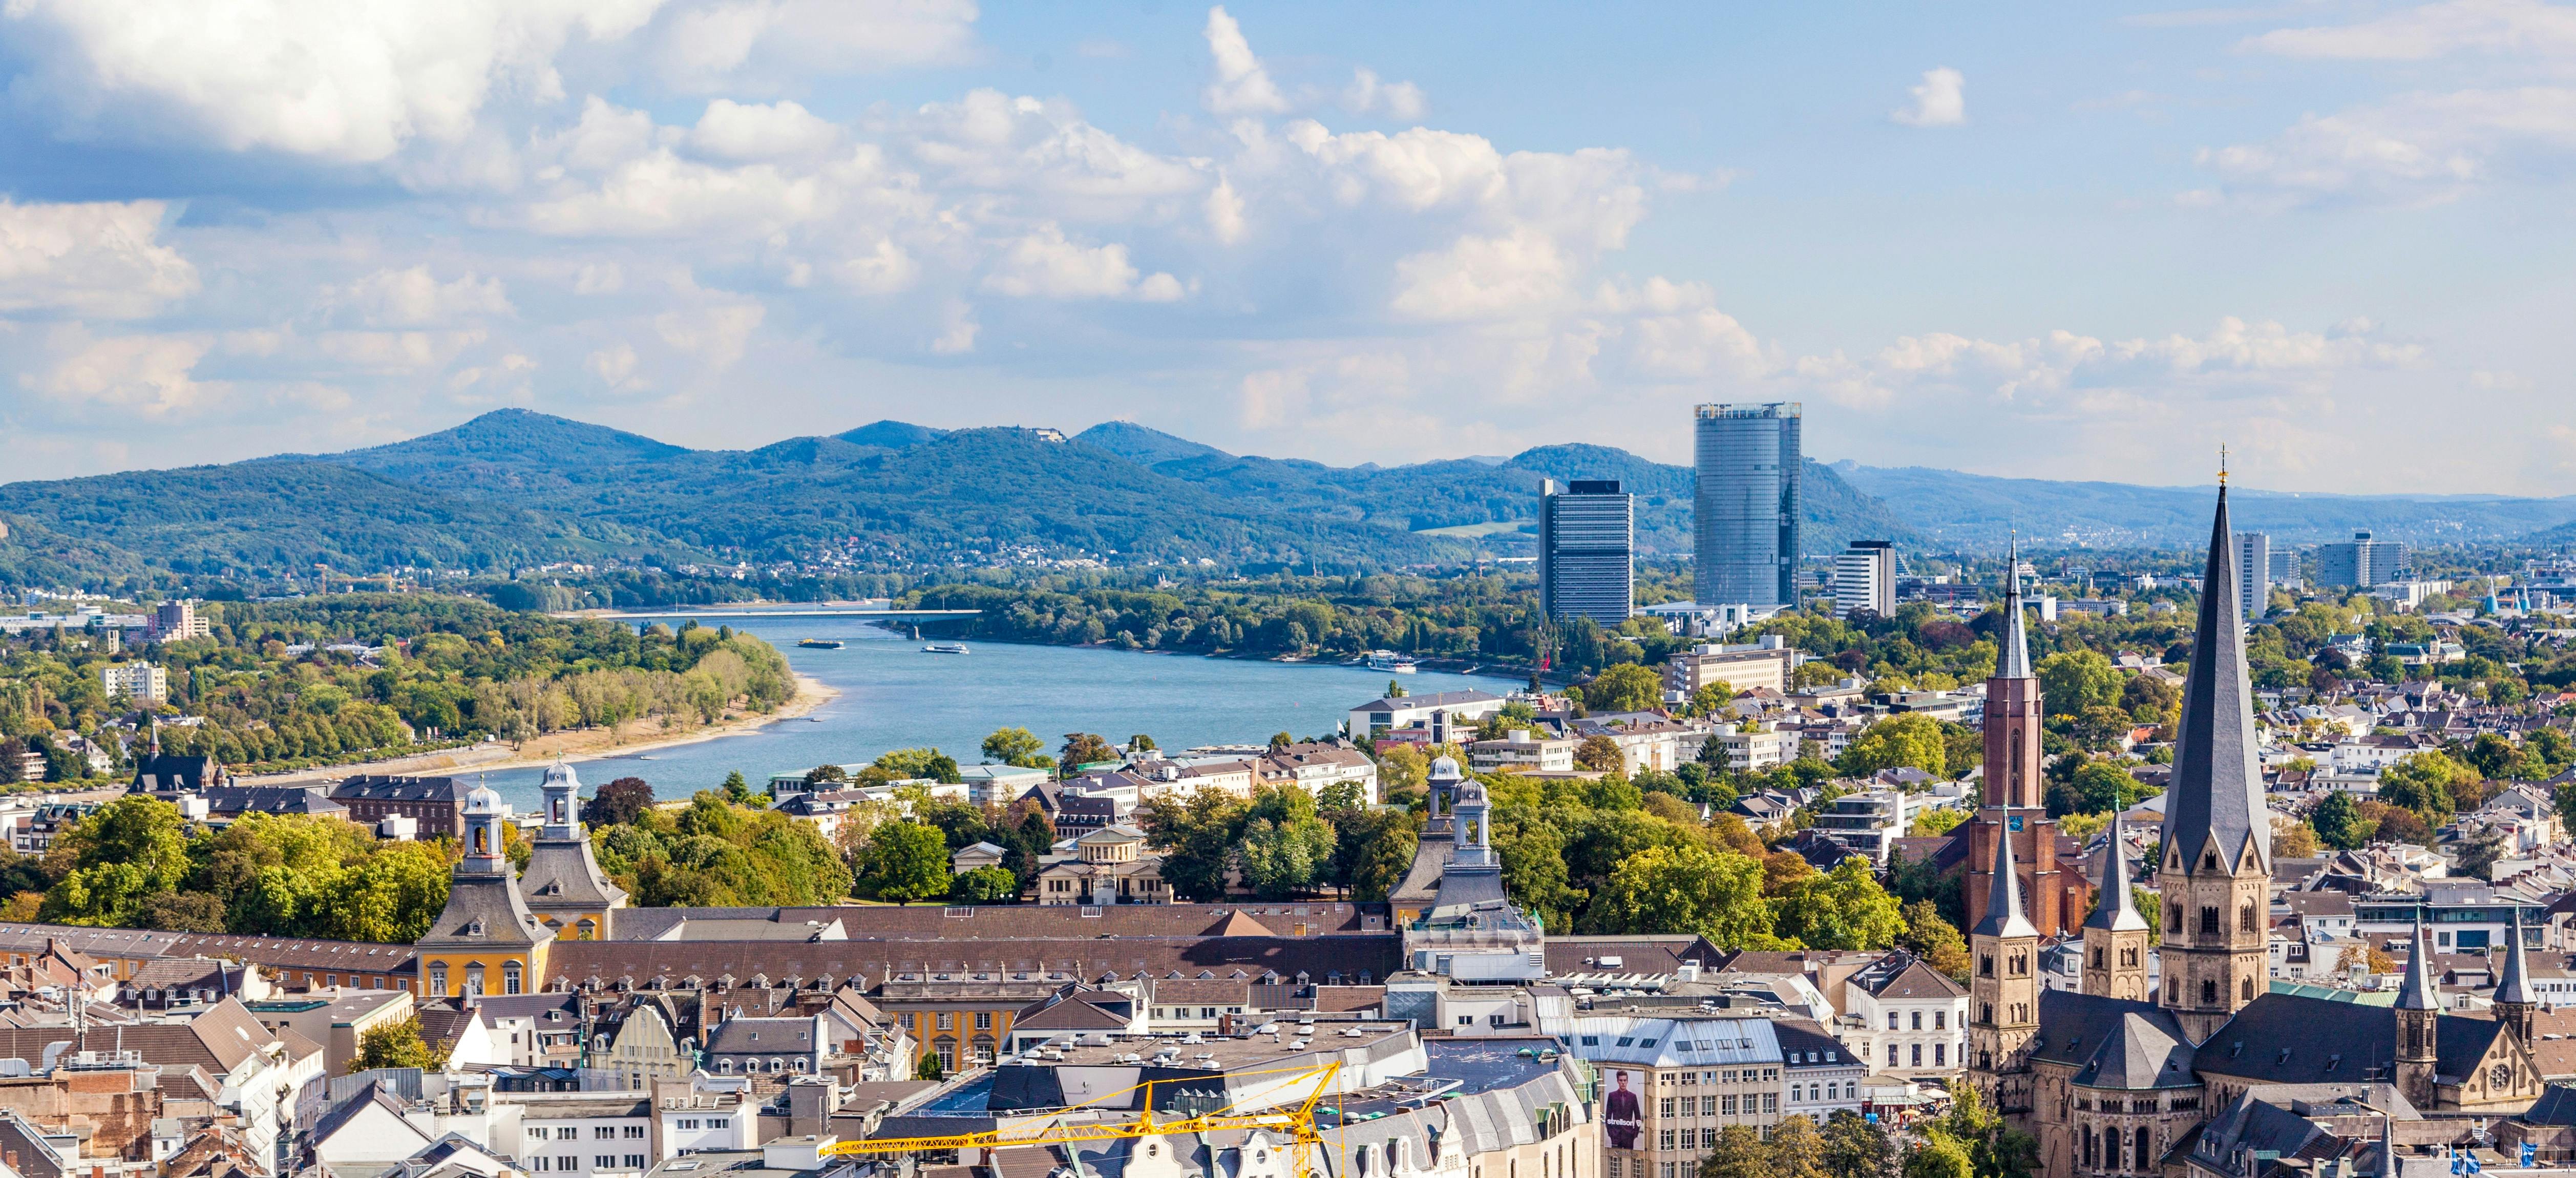 Self guided tour with interactive city game of Bonn